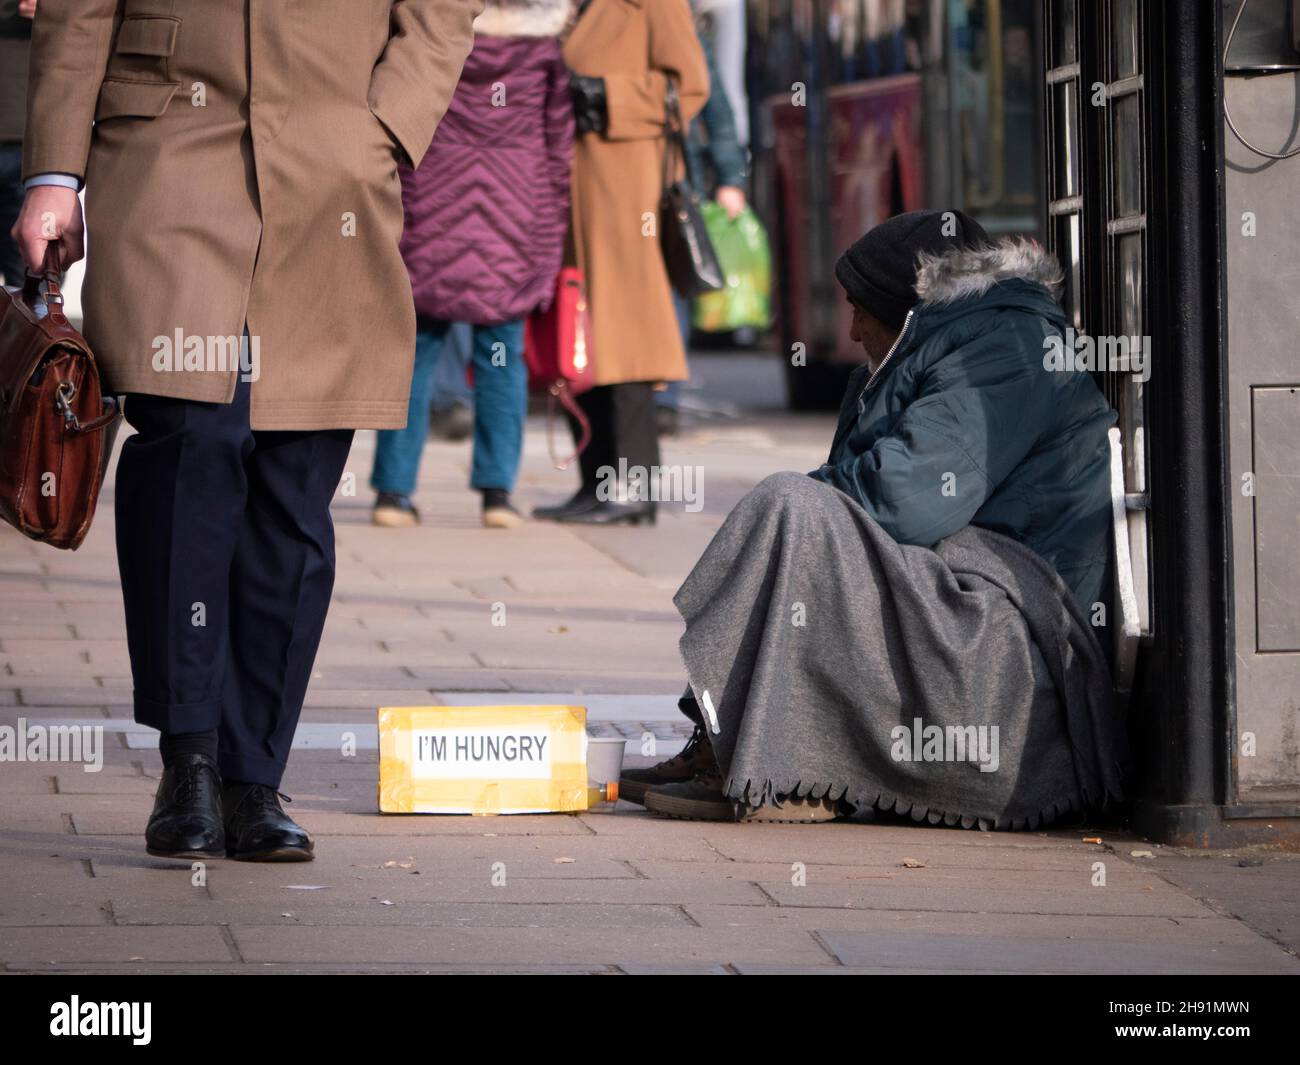 Rich poor divide inequality, male beggar with I'm Hungry sign, begs in Mayfair London as affluent well dressed people walk by Stock Photo